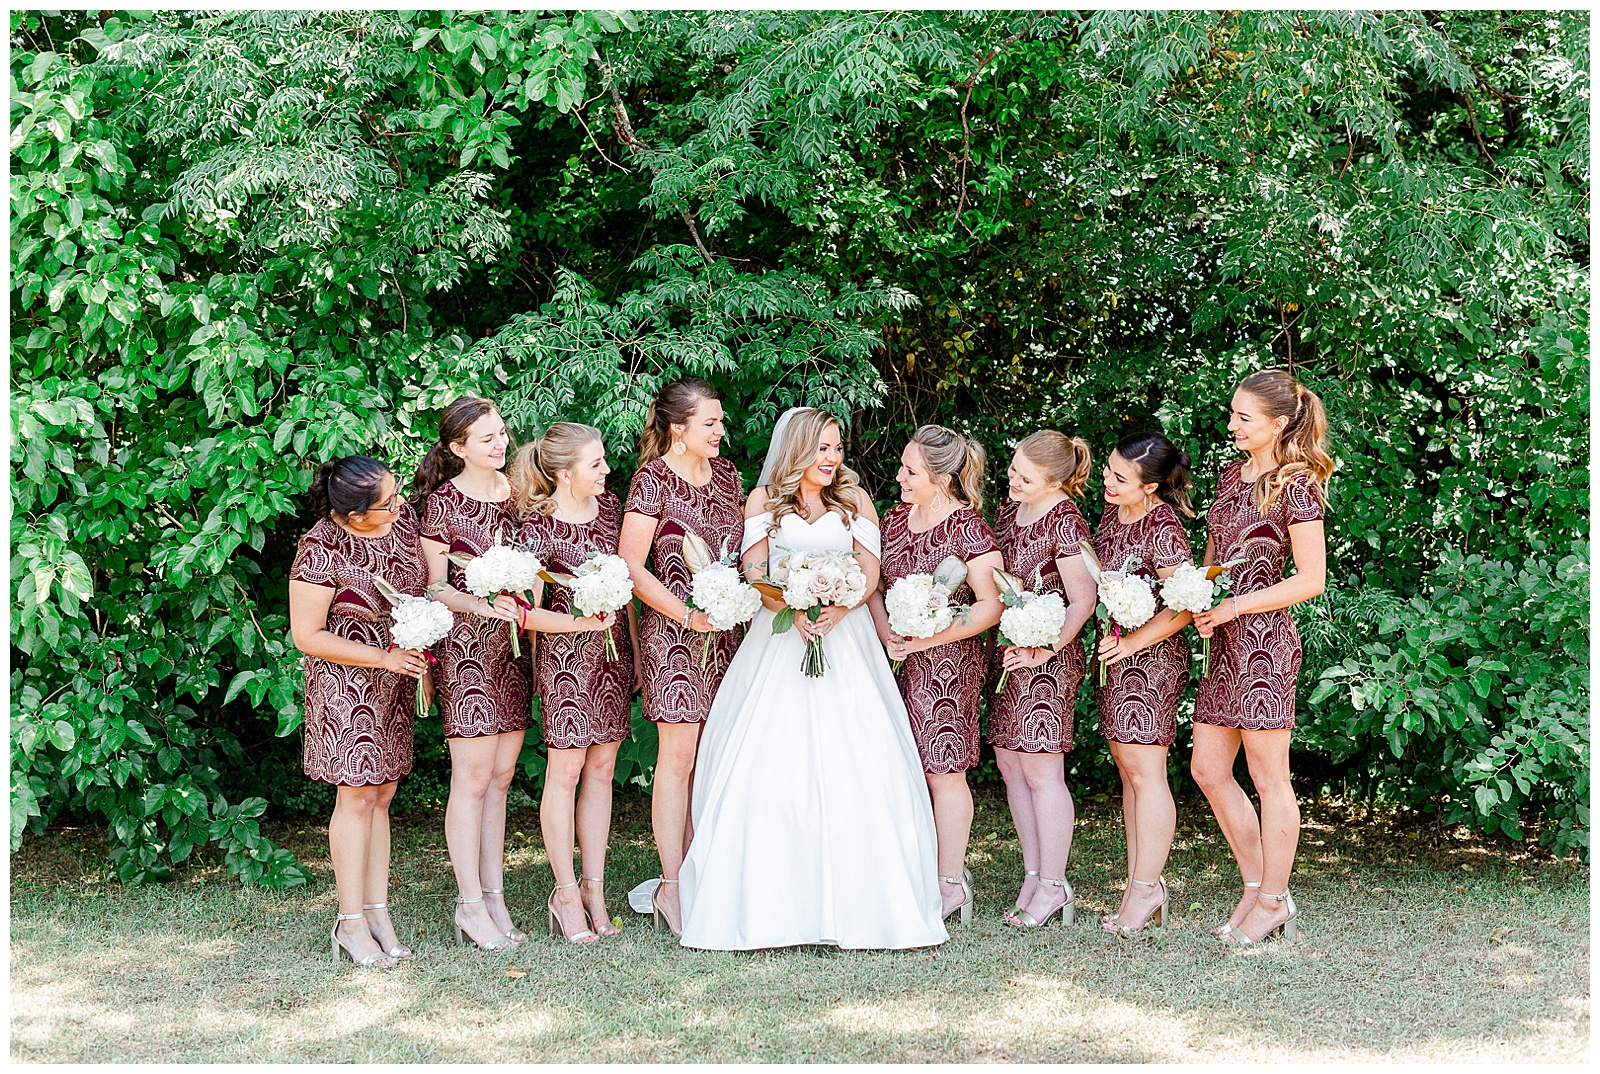 Red and Soft Pastel Pink Color Theme for Bridesmaid Gold and Red Dresses and Bridesmaid First Look from Summer Wedding in Charlotte, NC | check out the full wedding at KevynDixonPhoto.com